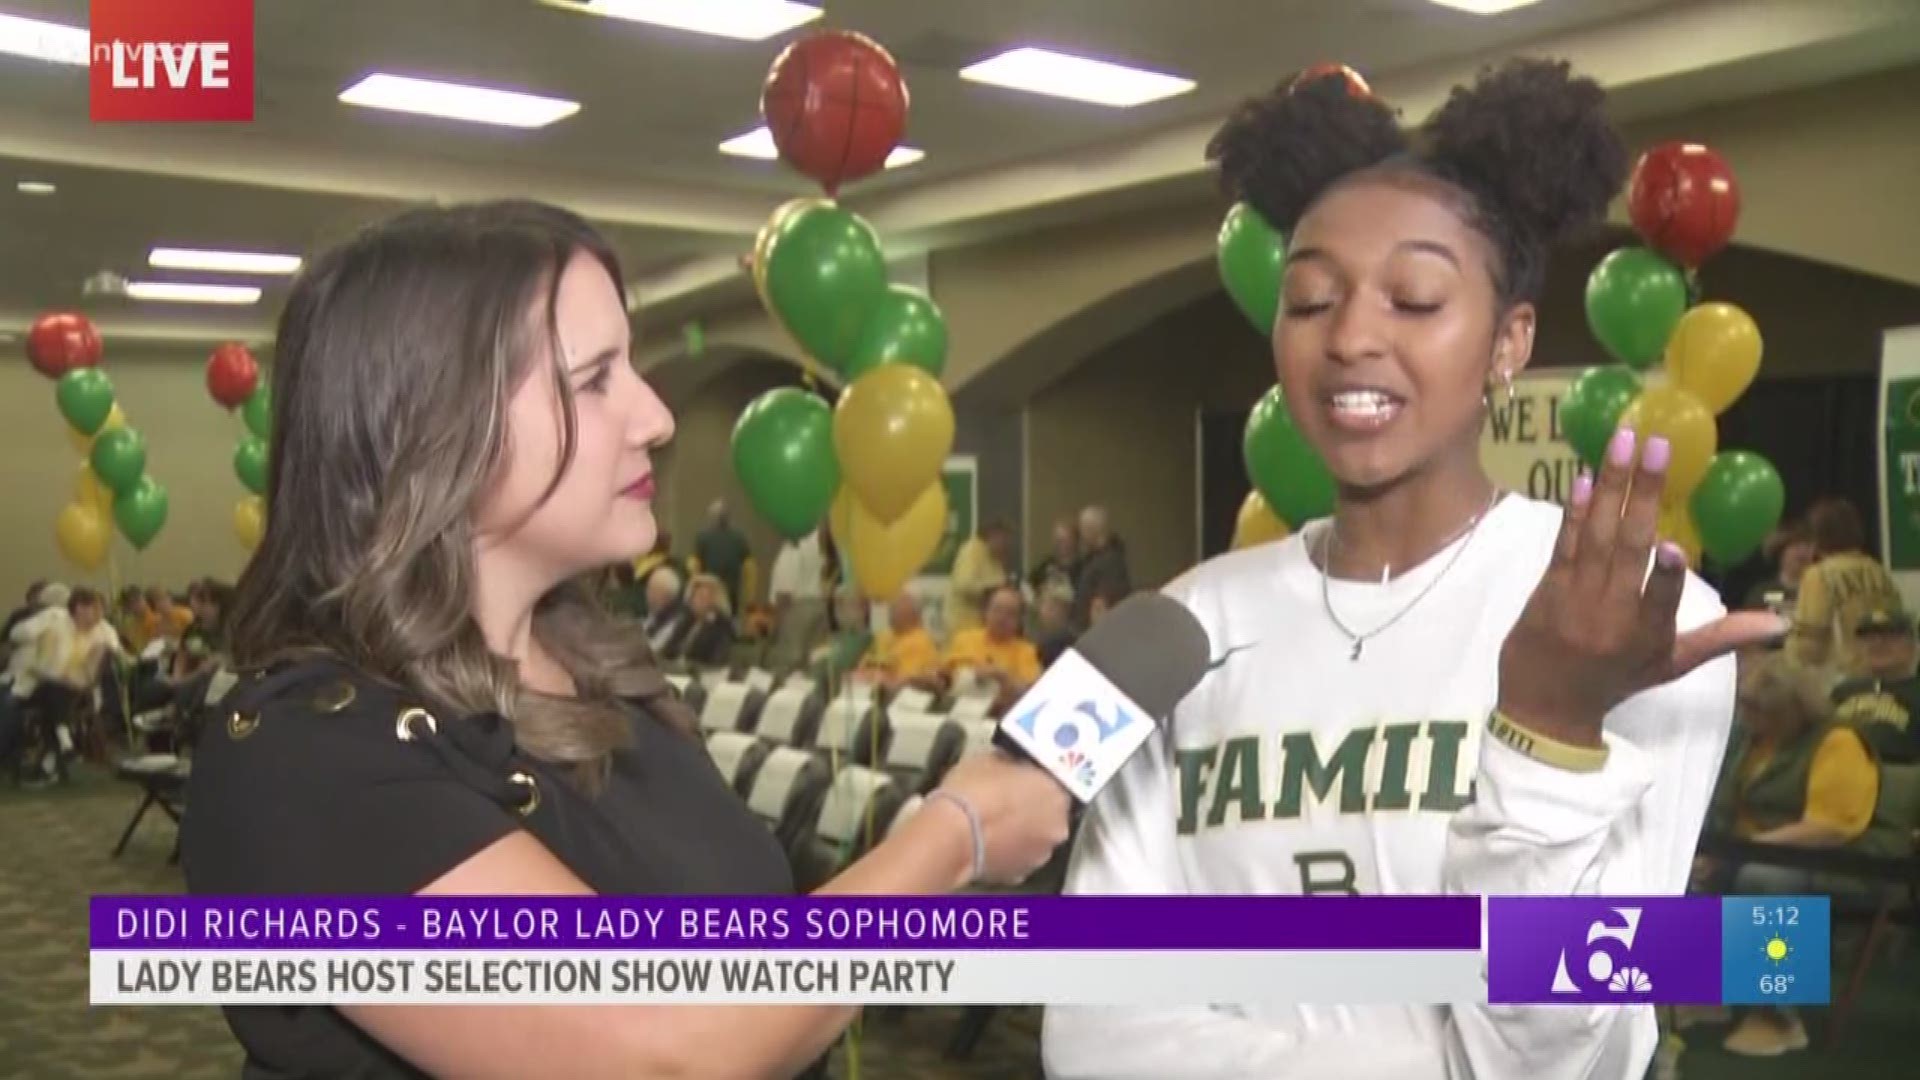 Despite the fact ESPN accidentally leaked the bracket early, the Lady Bears are hosting a Selection Show watch party.